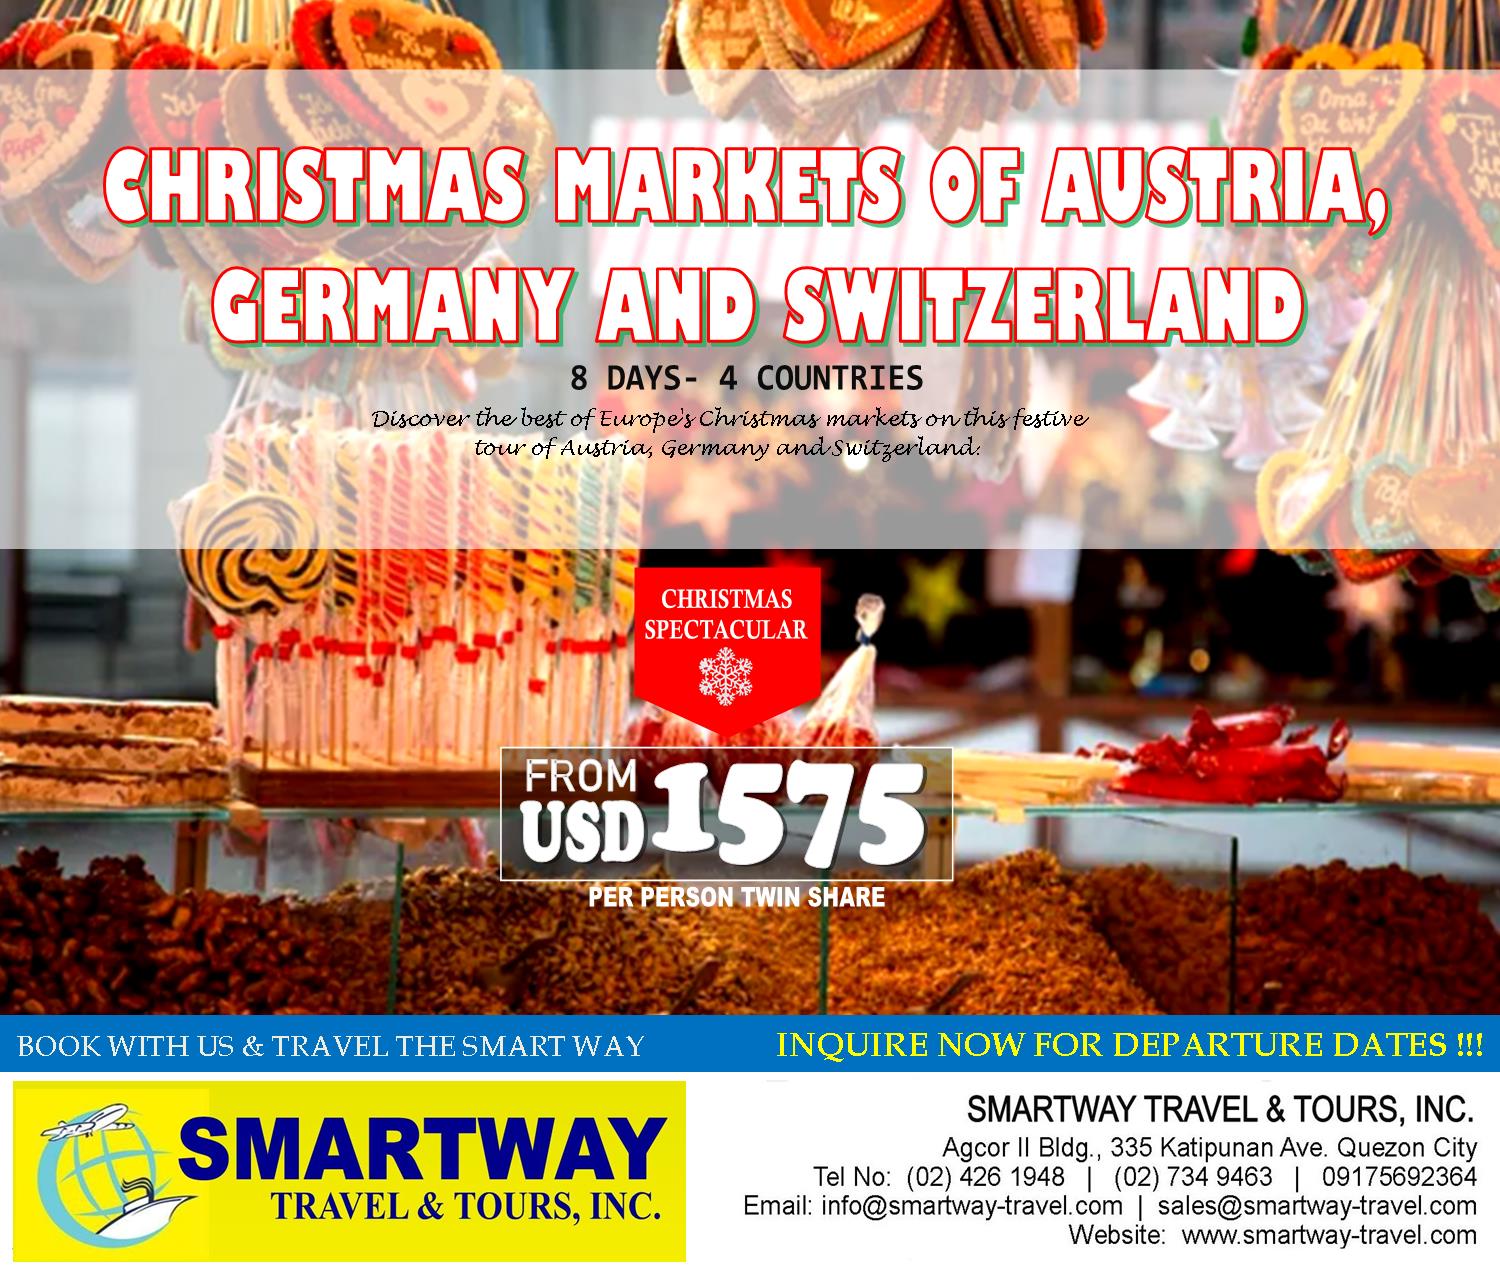 CHRISTMAS MARKETS OF AUSTRIA GERMANY AND SWITZERLAND 8 DAYS- 4 COUNTRIES - Smartway Travel and ...